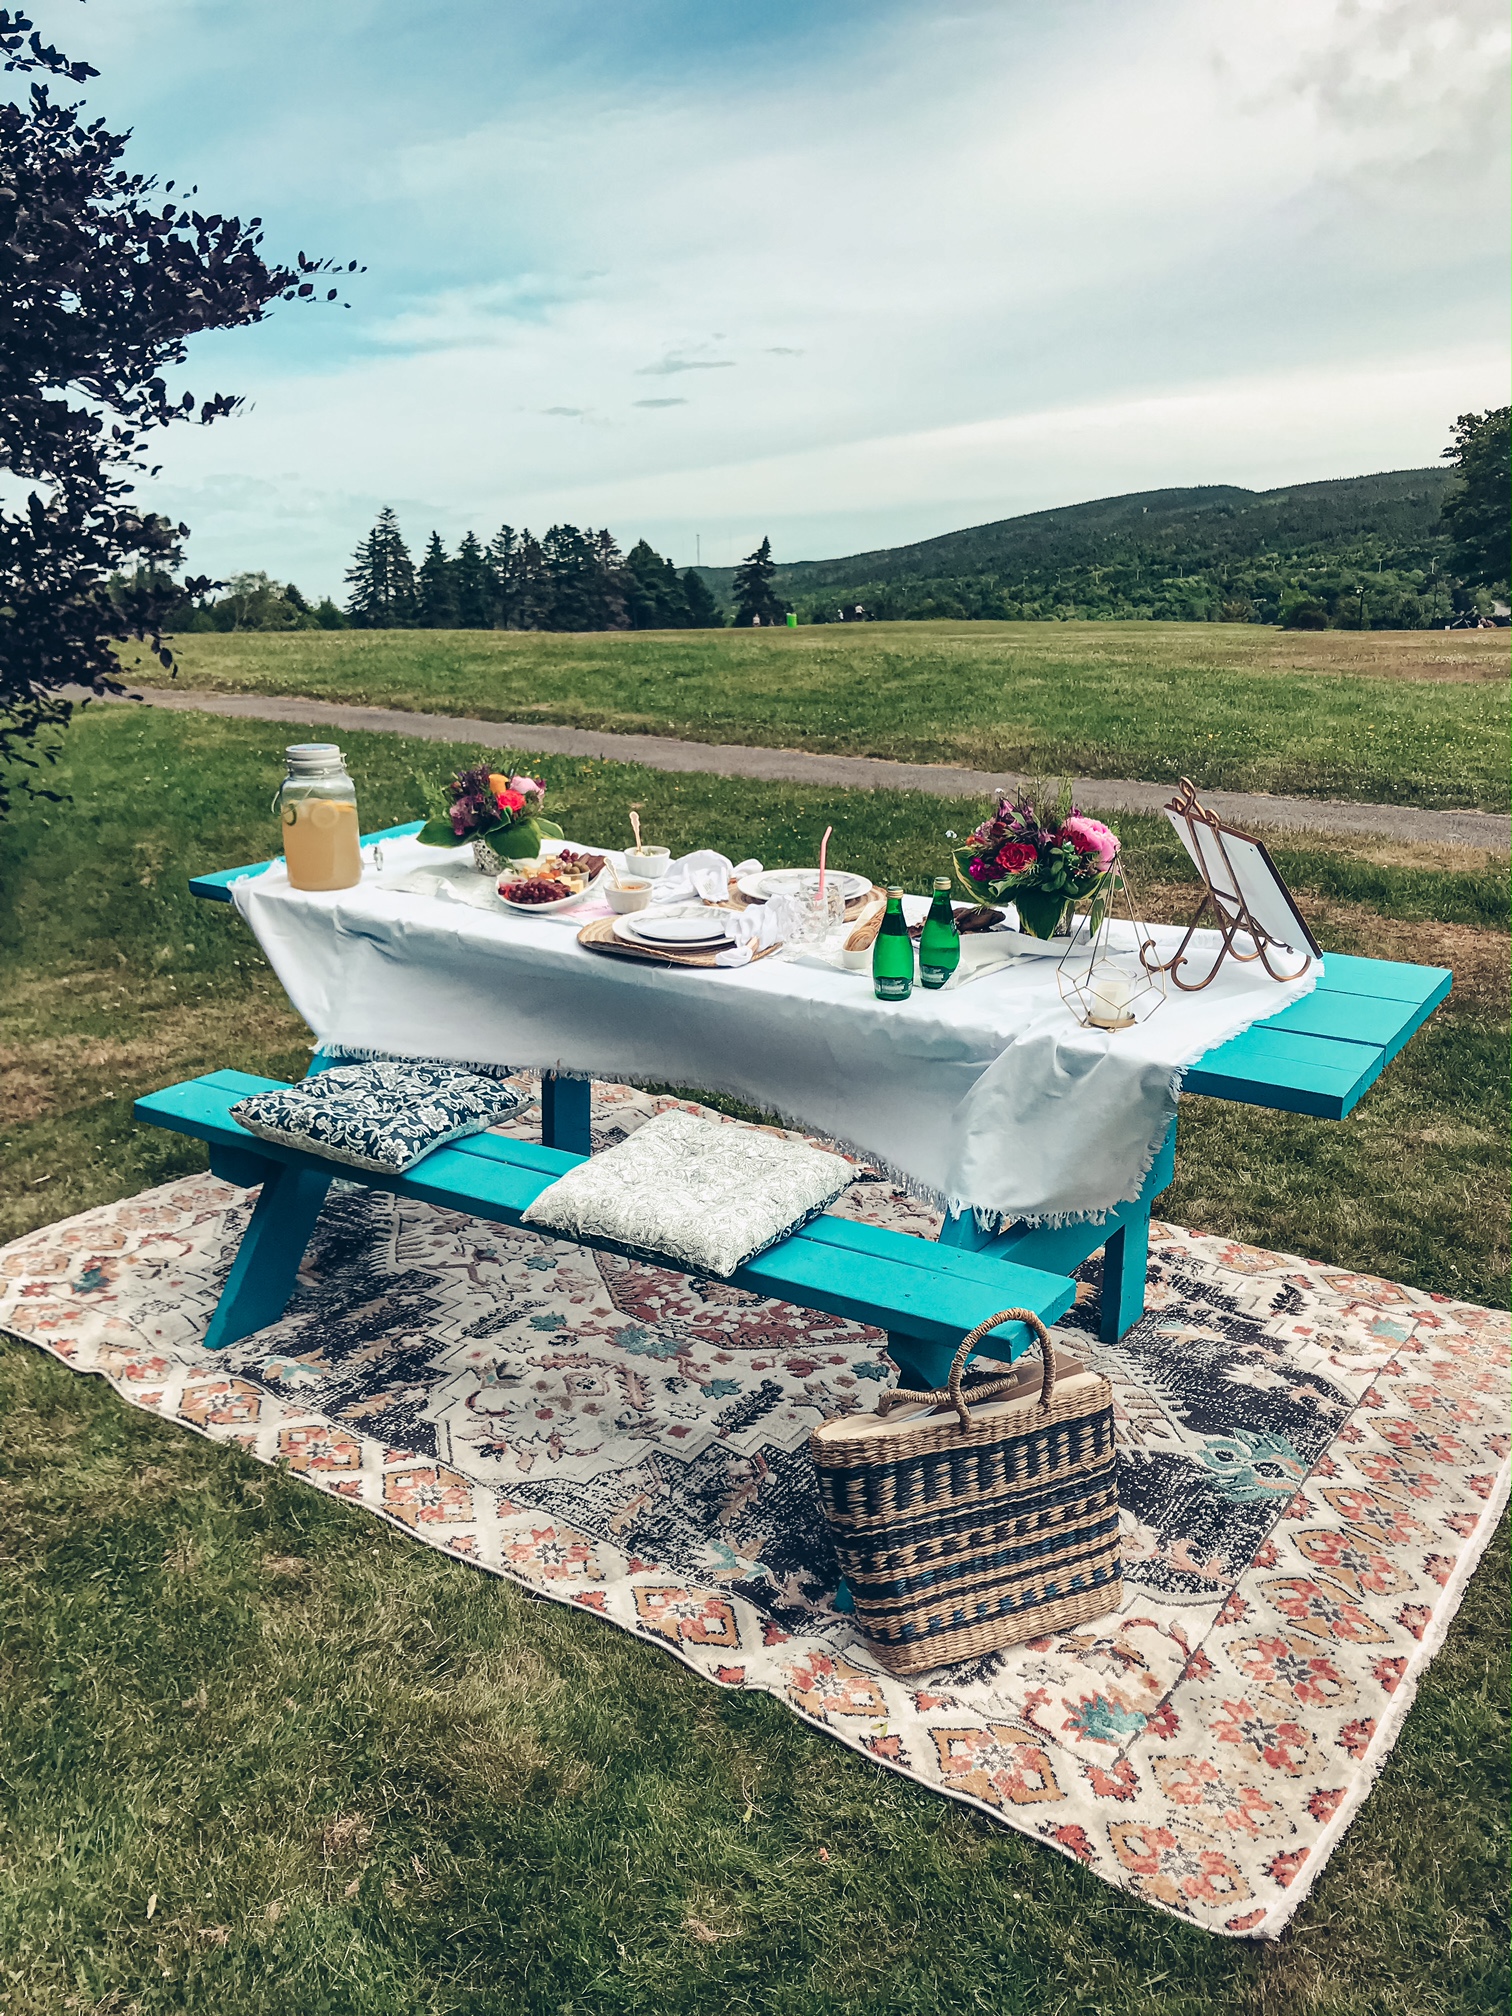 A photo of the picnic setup. A bright blue accessible picnic table sits onto of a colourful rug. There are cushions on the bench and the table is topped with a white tablecloth, a table runner, fancy dinnerware, flowers and food and drinks. In the background is a green field and cloudy sky.